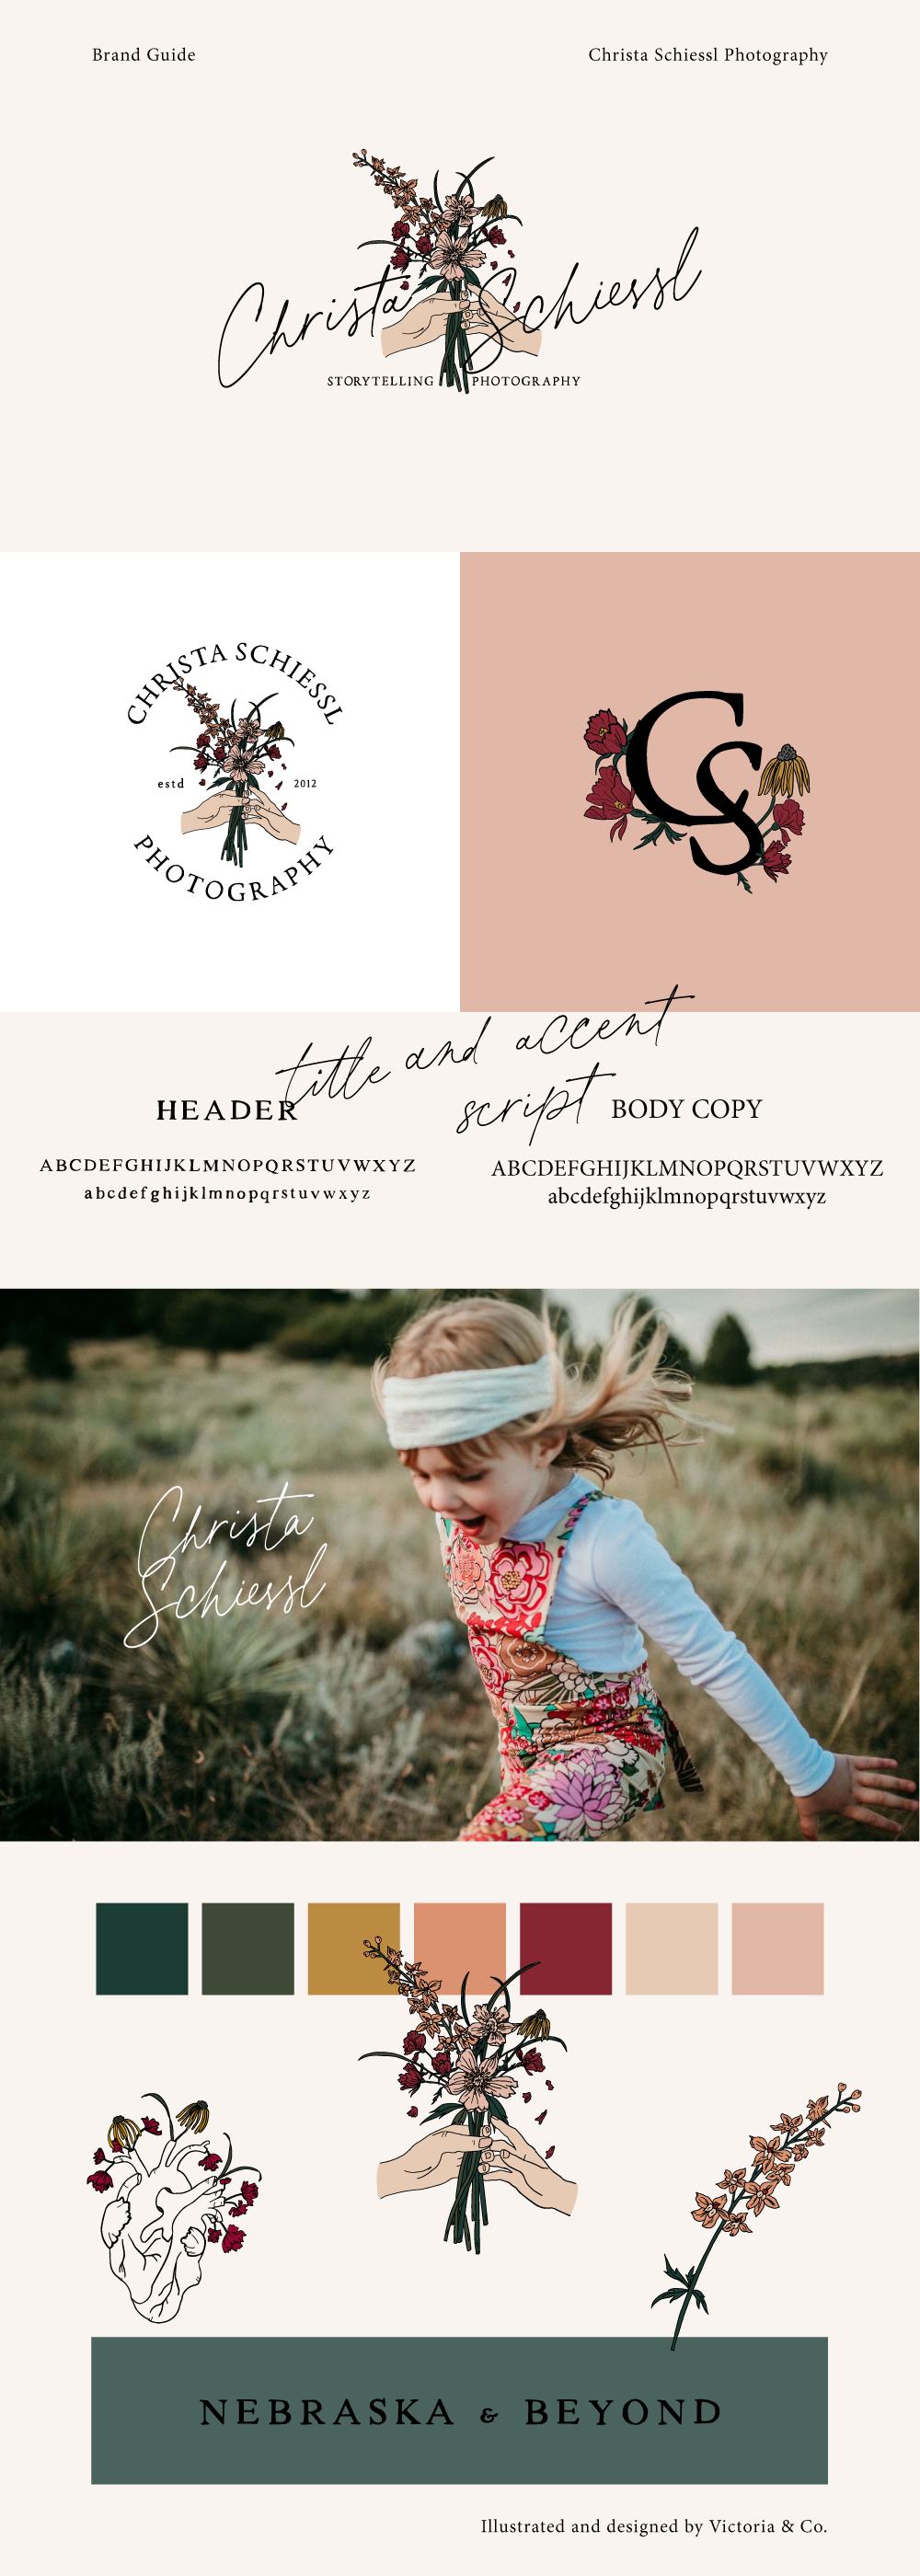 Brand board for Christa Schiessl Photography by Victoria & Co.